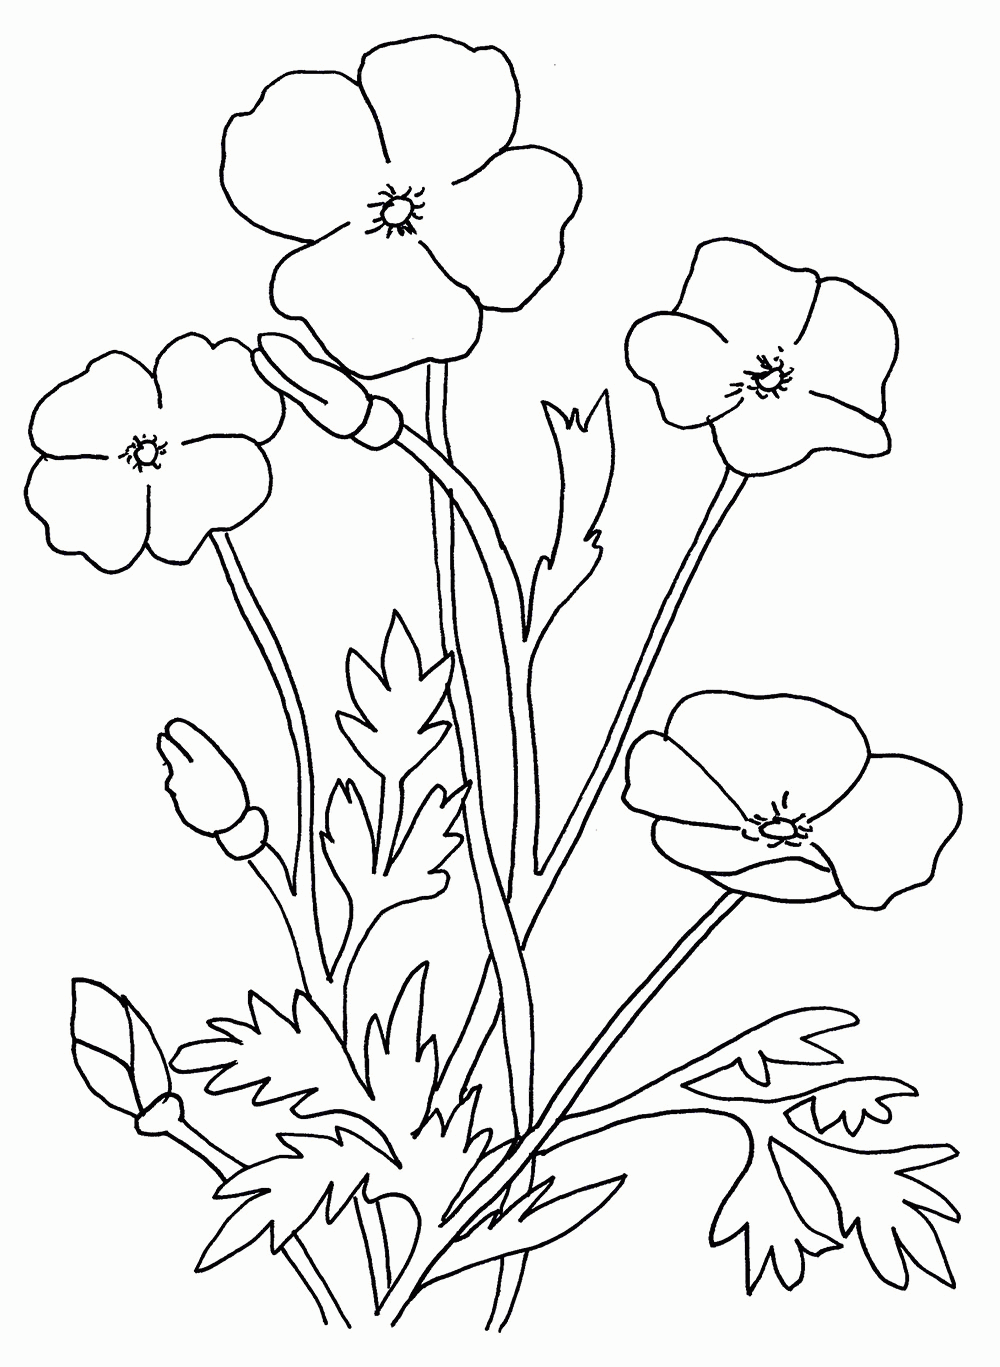 Free Coloring Pages Poppy Flower, Download Free Coloring Pages ...